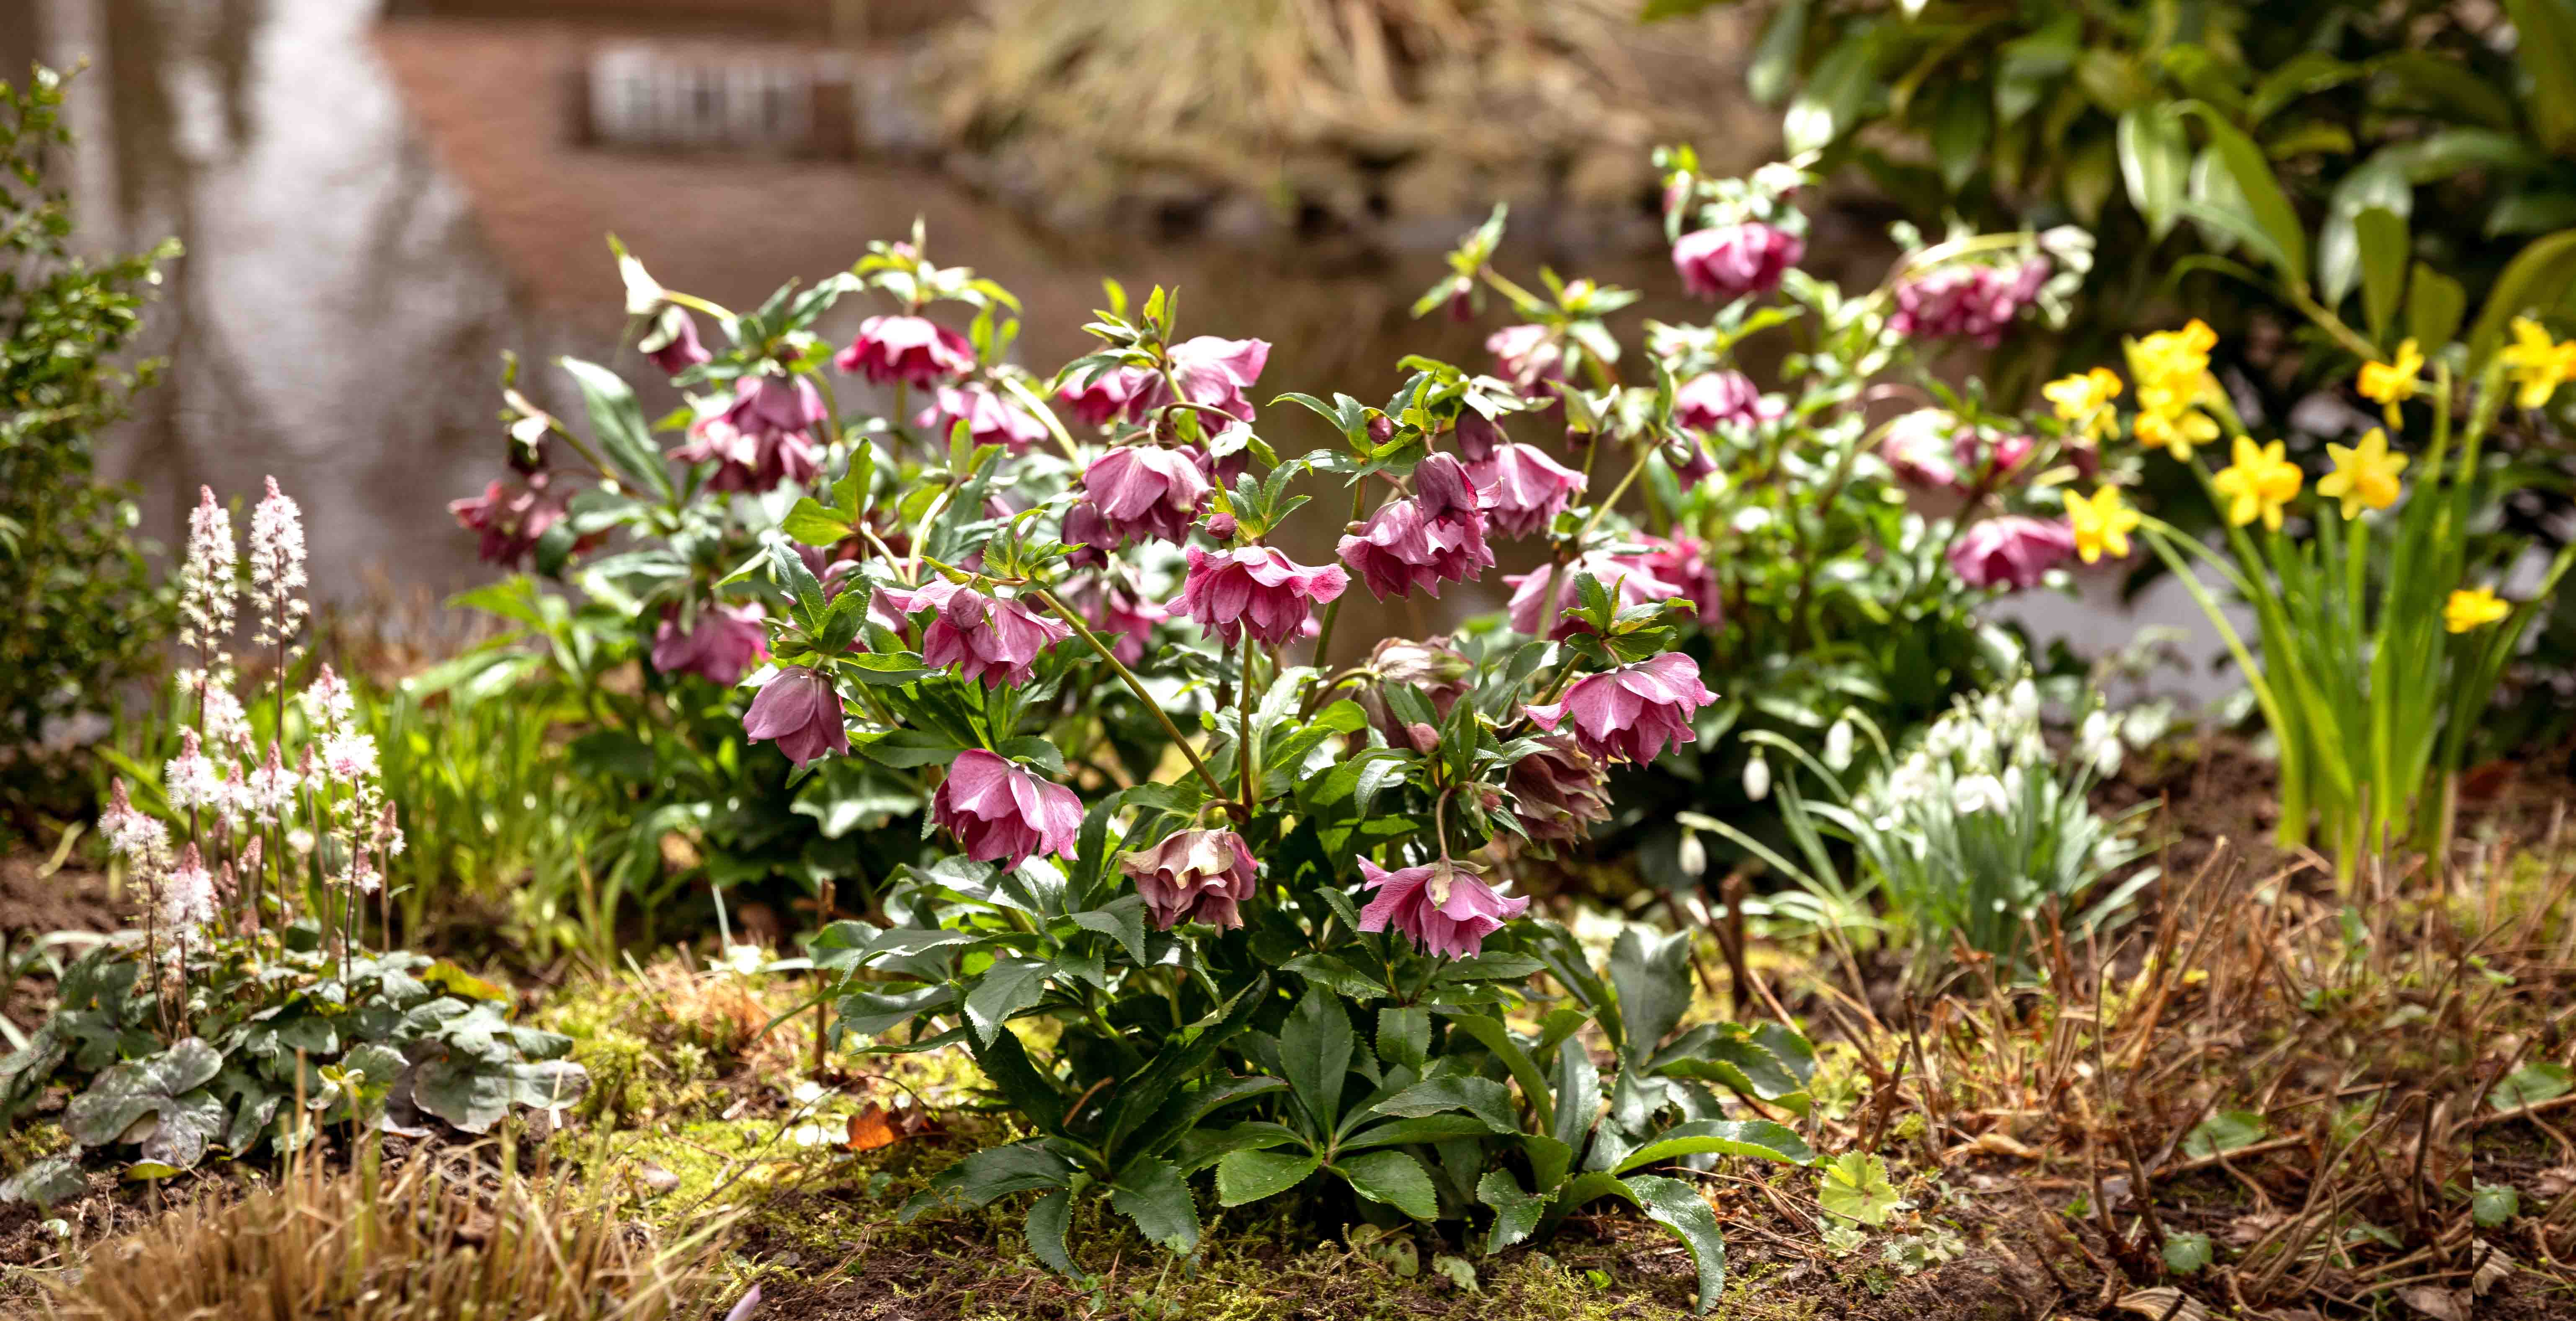 All about Lenten Roses in the garden